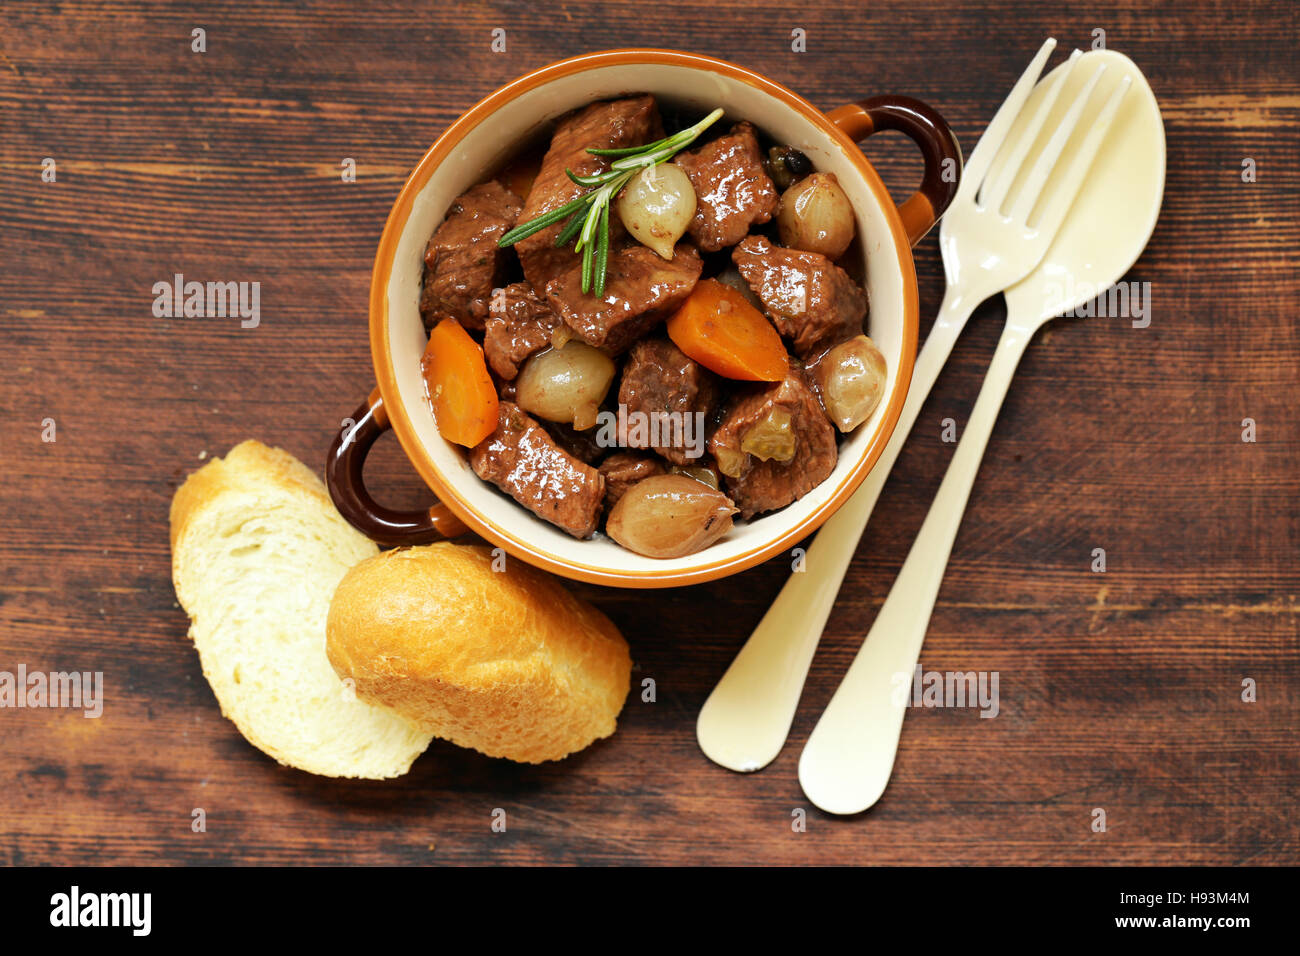 Traditional  beef goulash - Boeuf bourguigno. Comfort food. Stew meat with vegetables Stock Photo